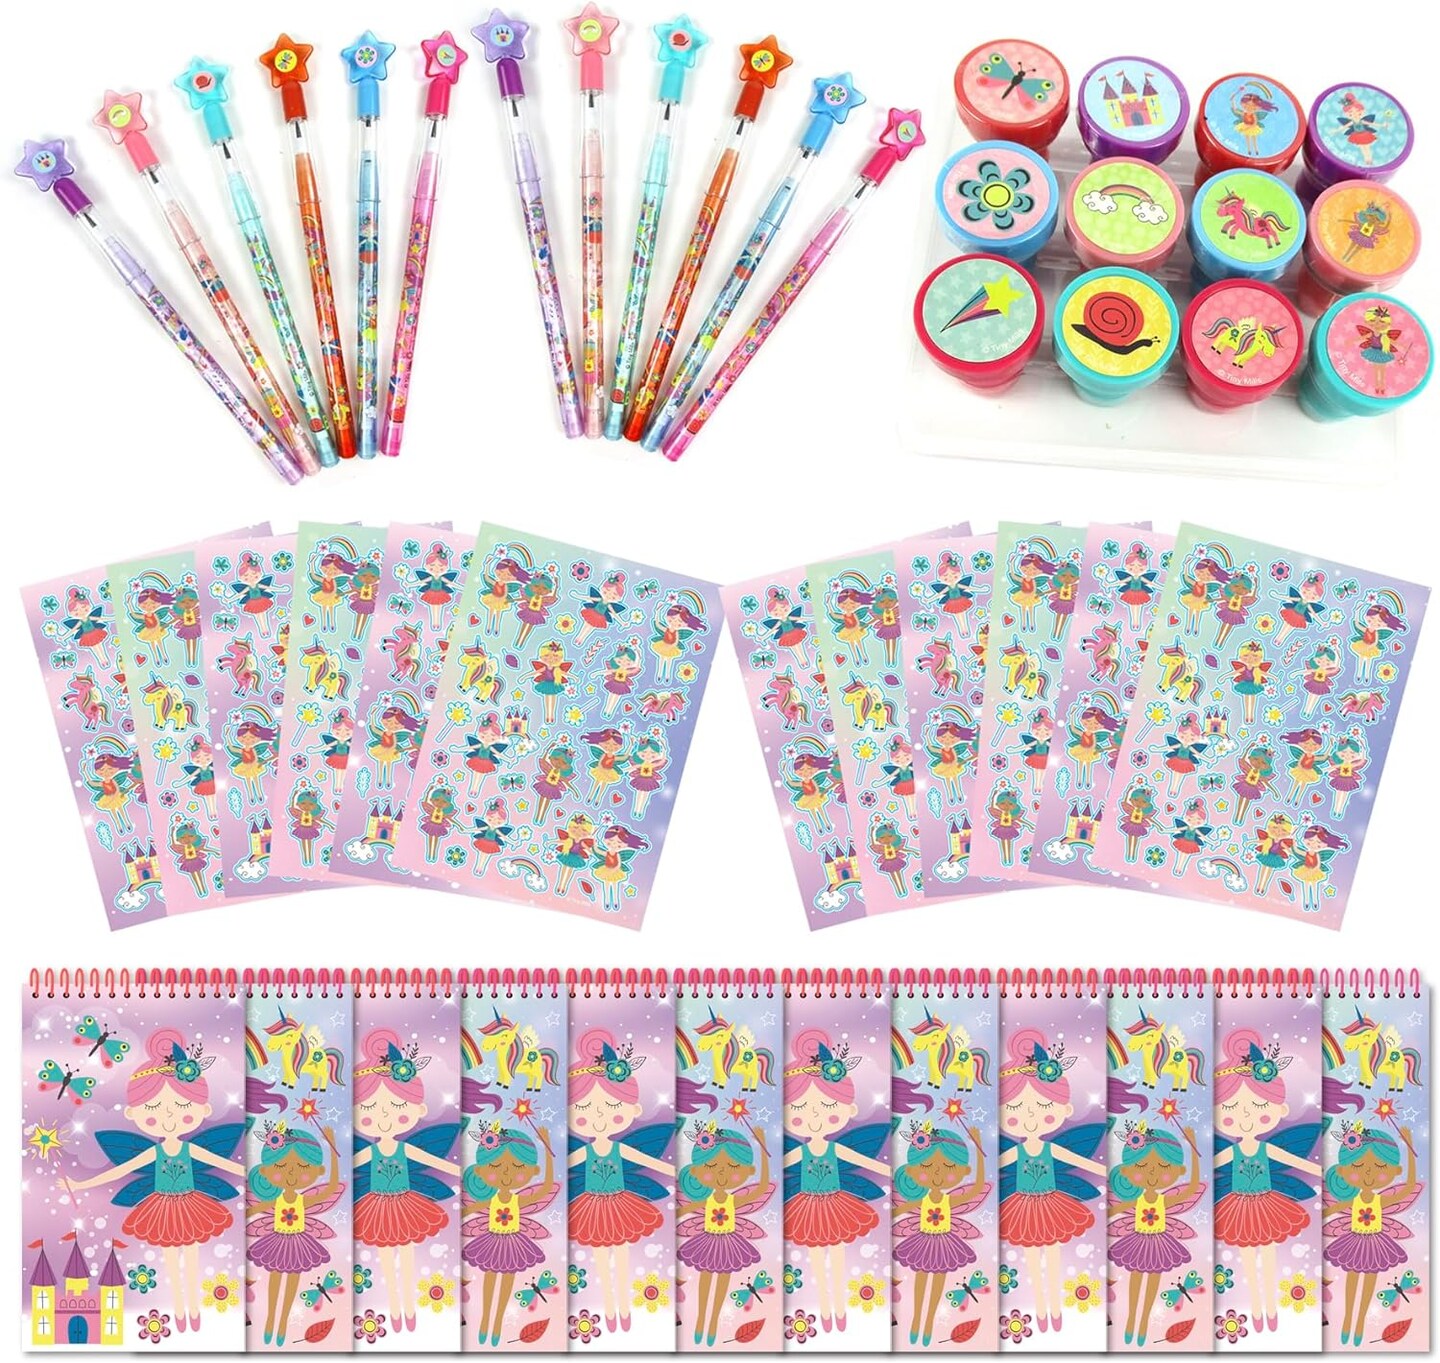 TINYMILLS Magical Fairies Birthday Party Favor Set (12 multi-point pencils, 12 stampers, 12 sticker sheets, 12 small spiral notepads)